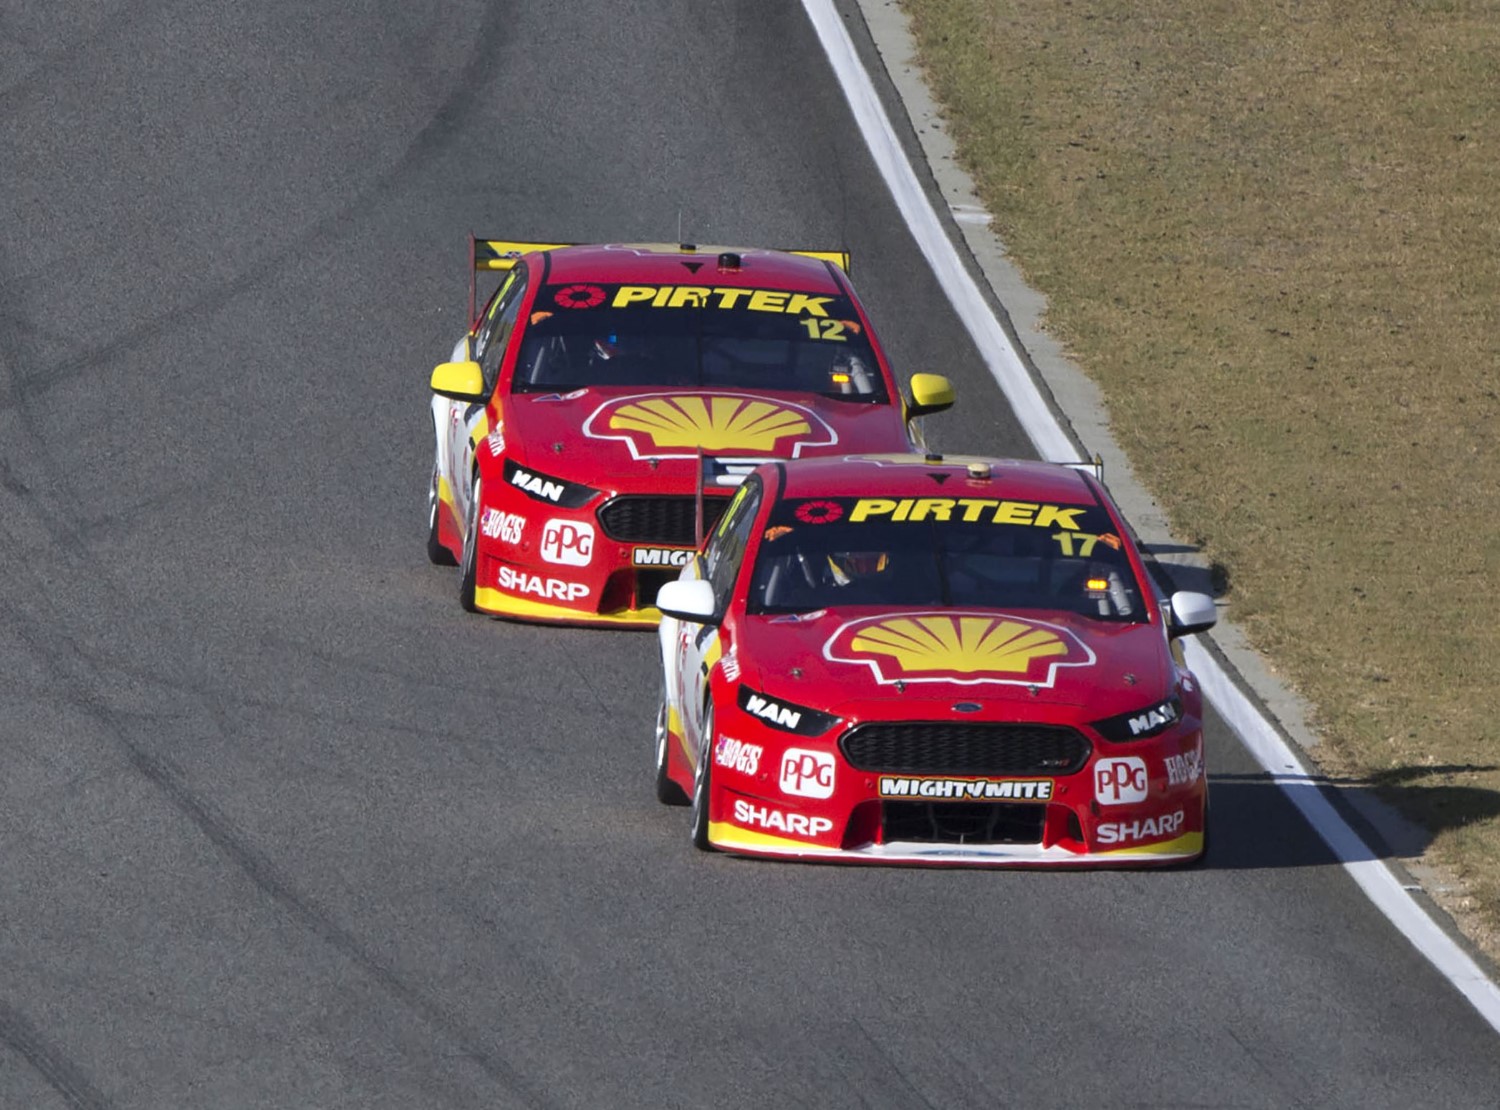 McLaughlin leads teammate Coulthard - it was a great battle between teammates